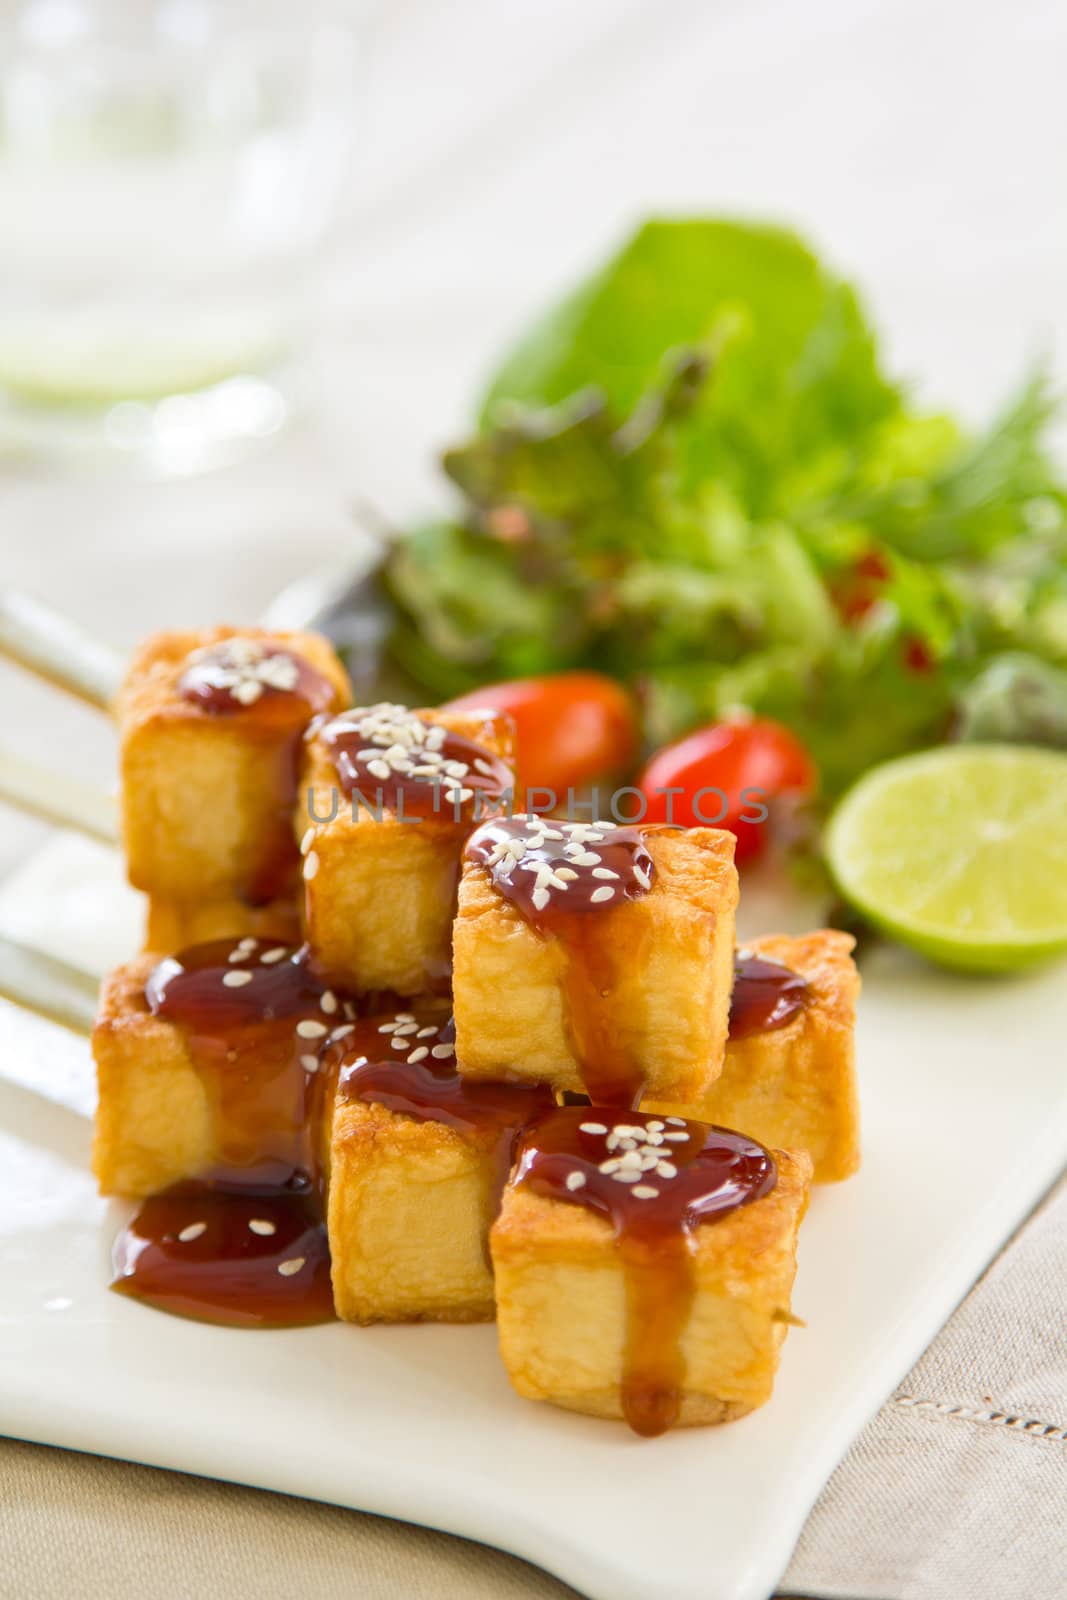 Grilled Tofu with teriyaki sauce and salad by vanillaechoes